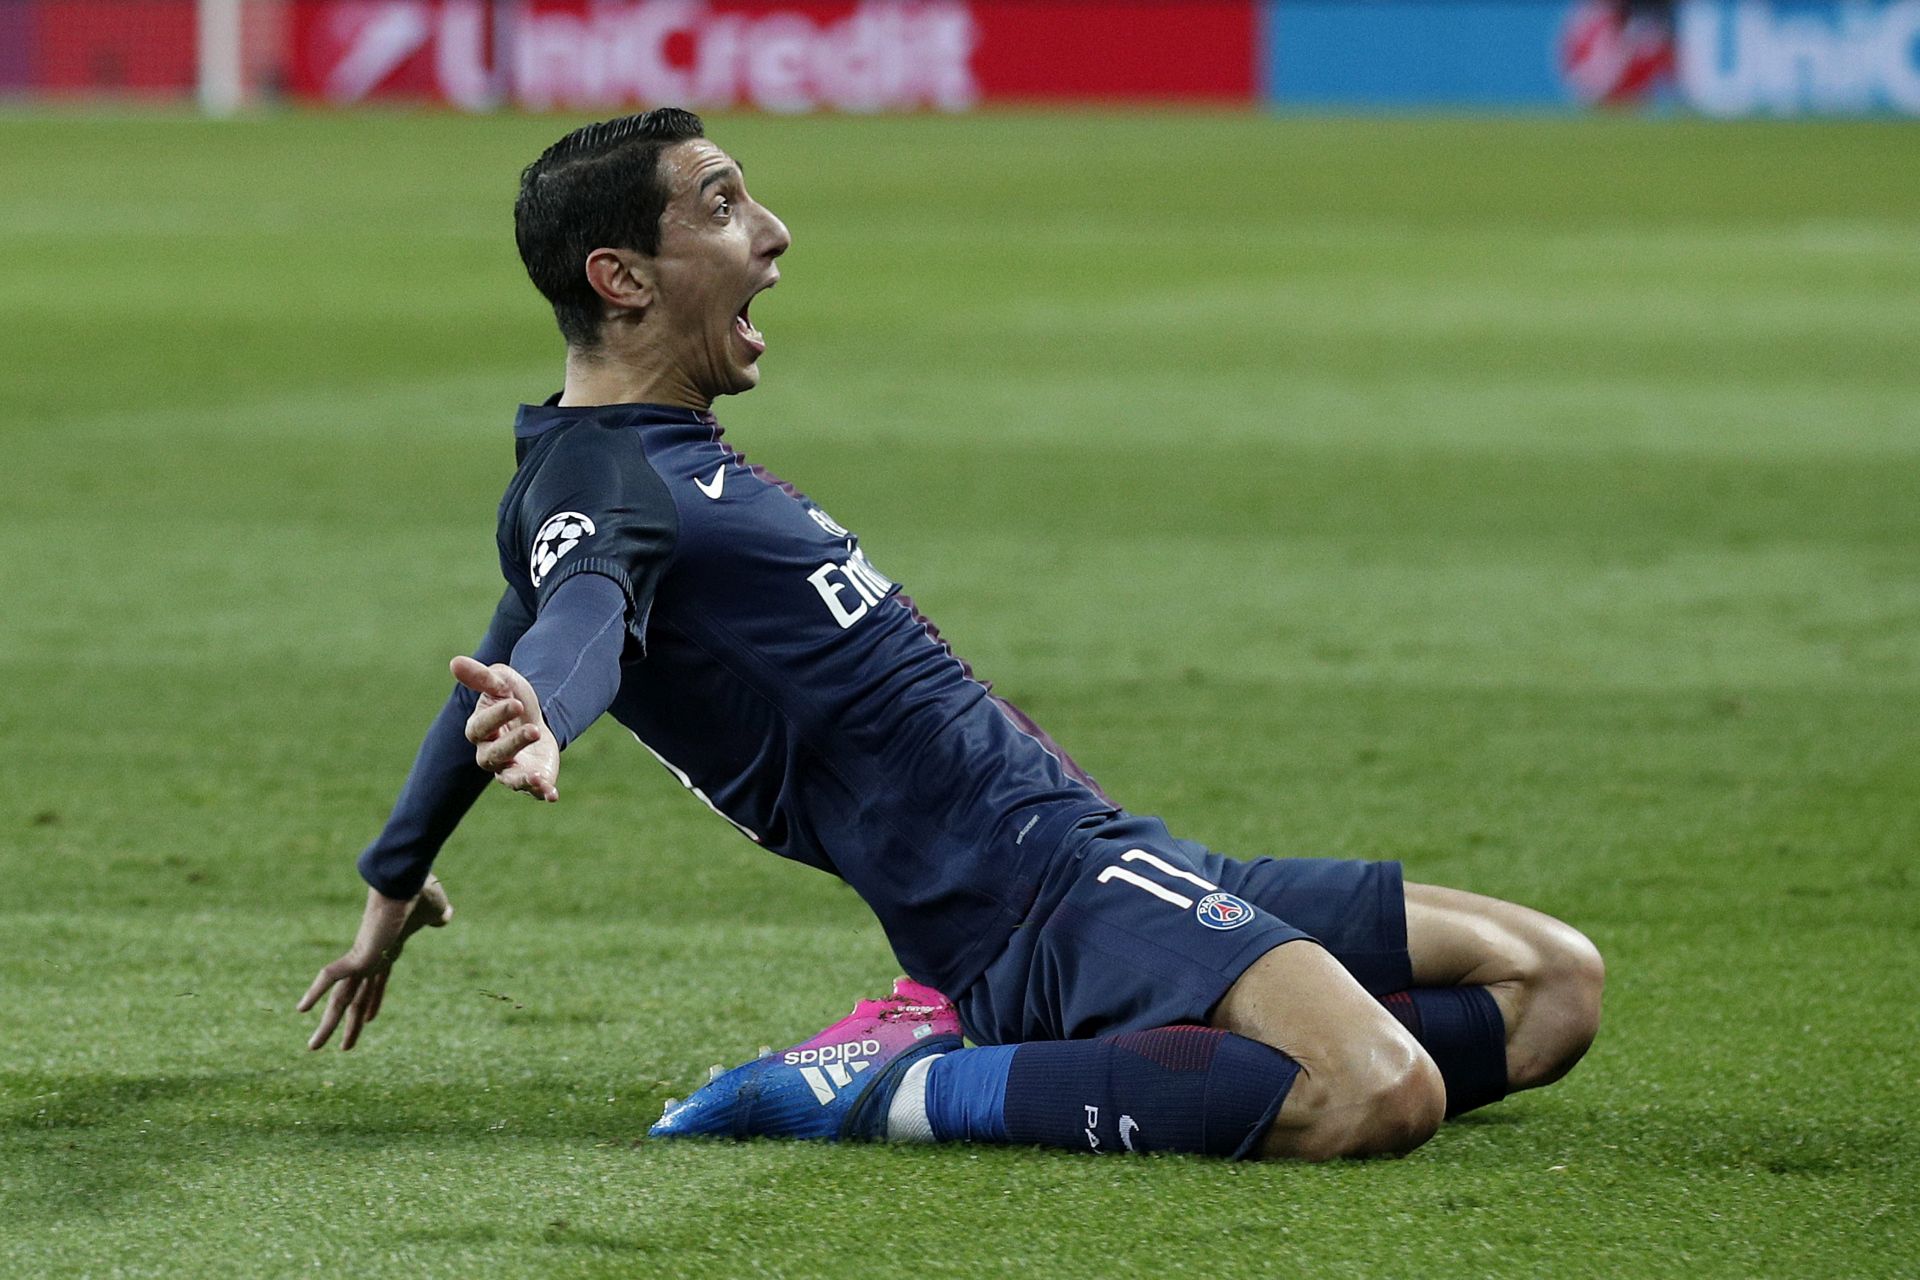 epa05793614 Paris Saint Germain's Angel Di Maria celebrates after scoring the 1-0 lead during the UEFA Champions League round of 16 first leg soccer match between Paris Saint Germain and FC Barcelona at the Parc des Princes Stadium, in Paris, France, 14 February 2017.  EPA/YOAN VALAT